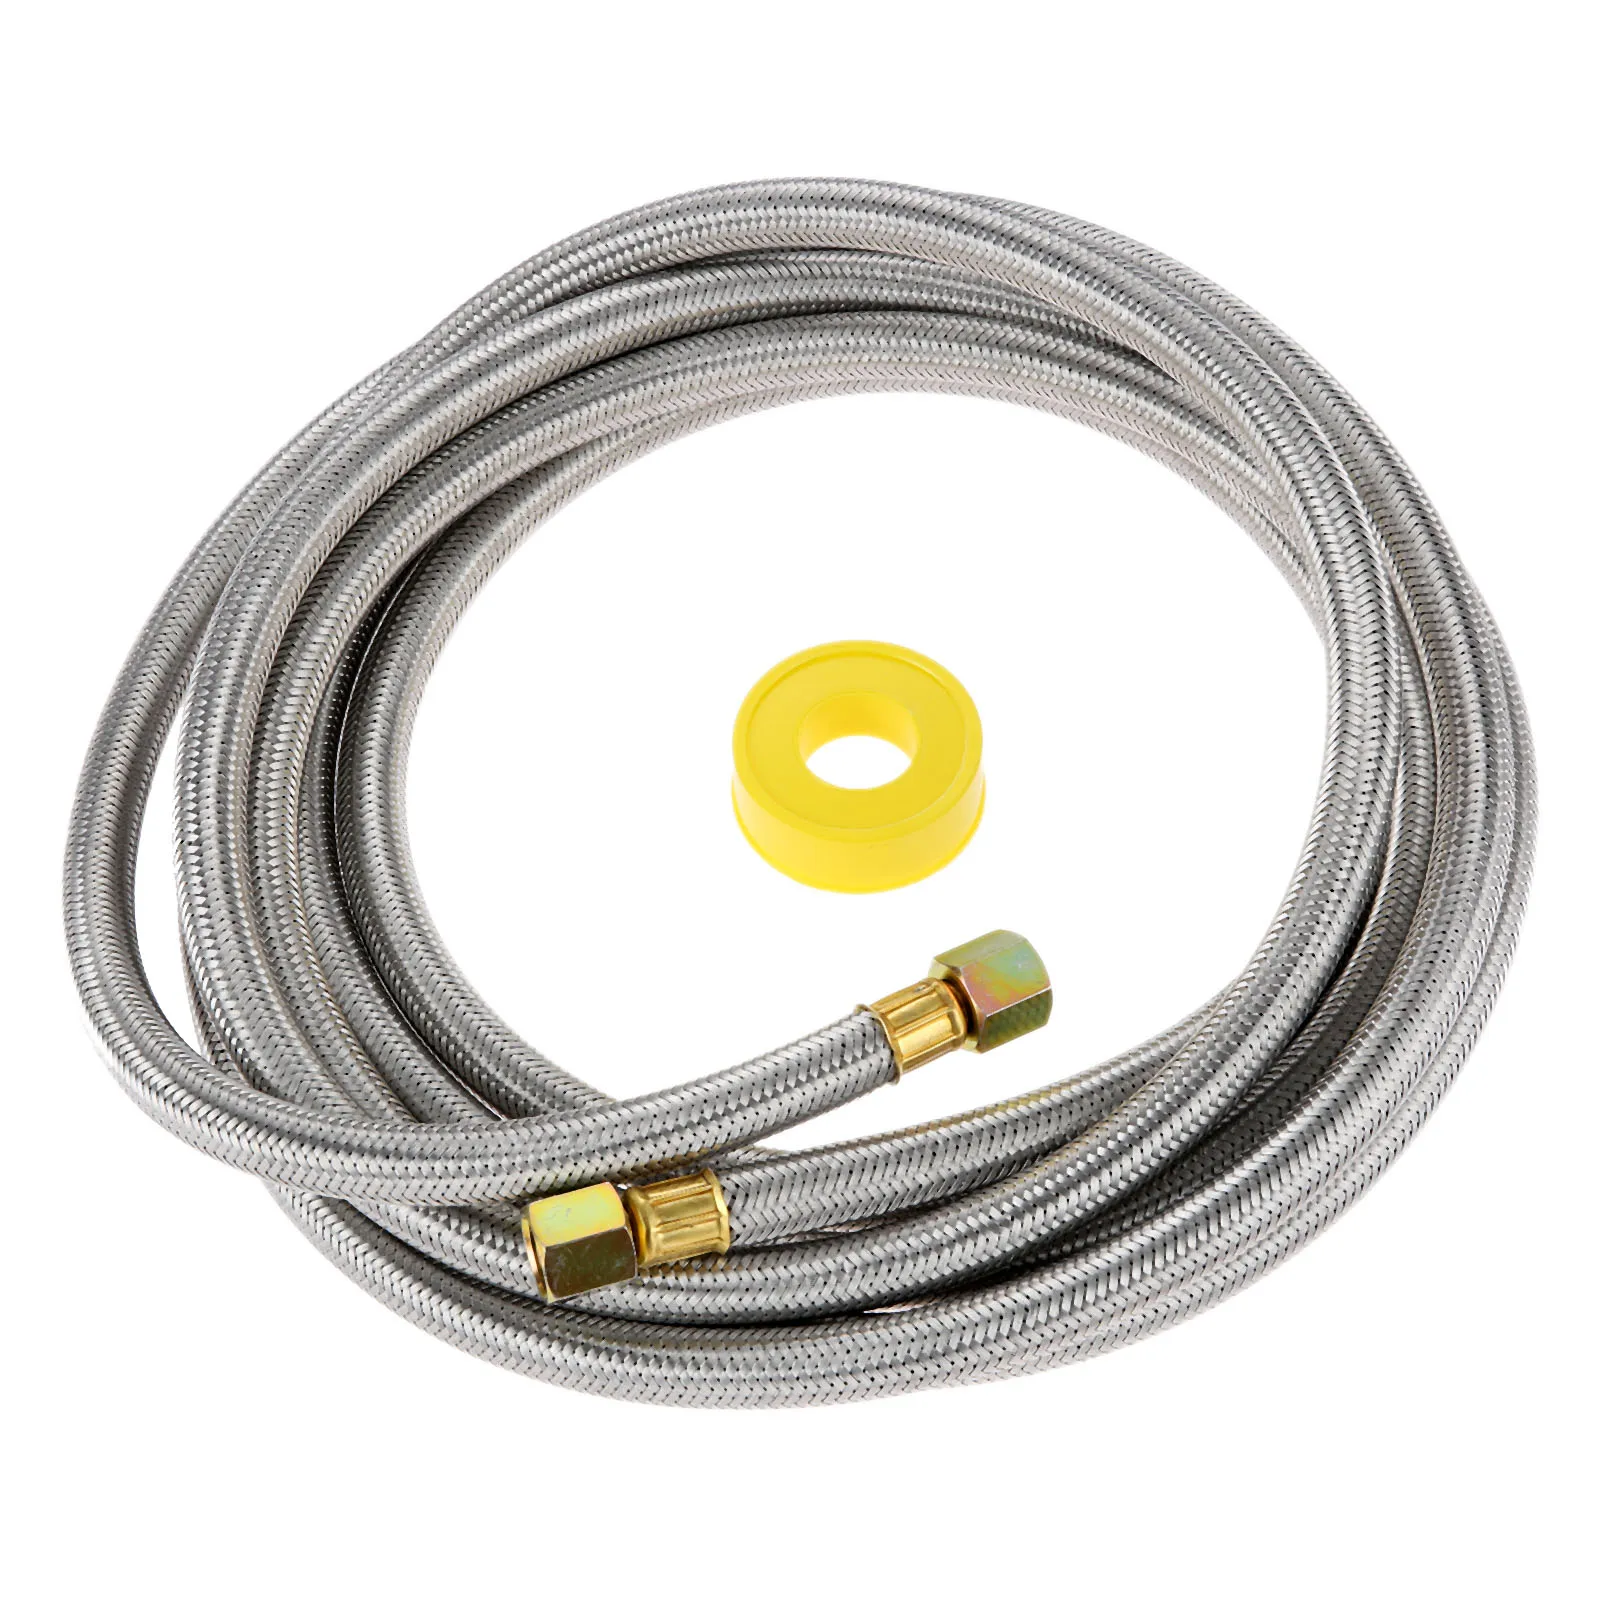 16Ft Stainless Steel Braided BBQ Grill Extension Propane Hose 3/8 Female Flare Threads with Gas Line Pipe Thread Tape